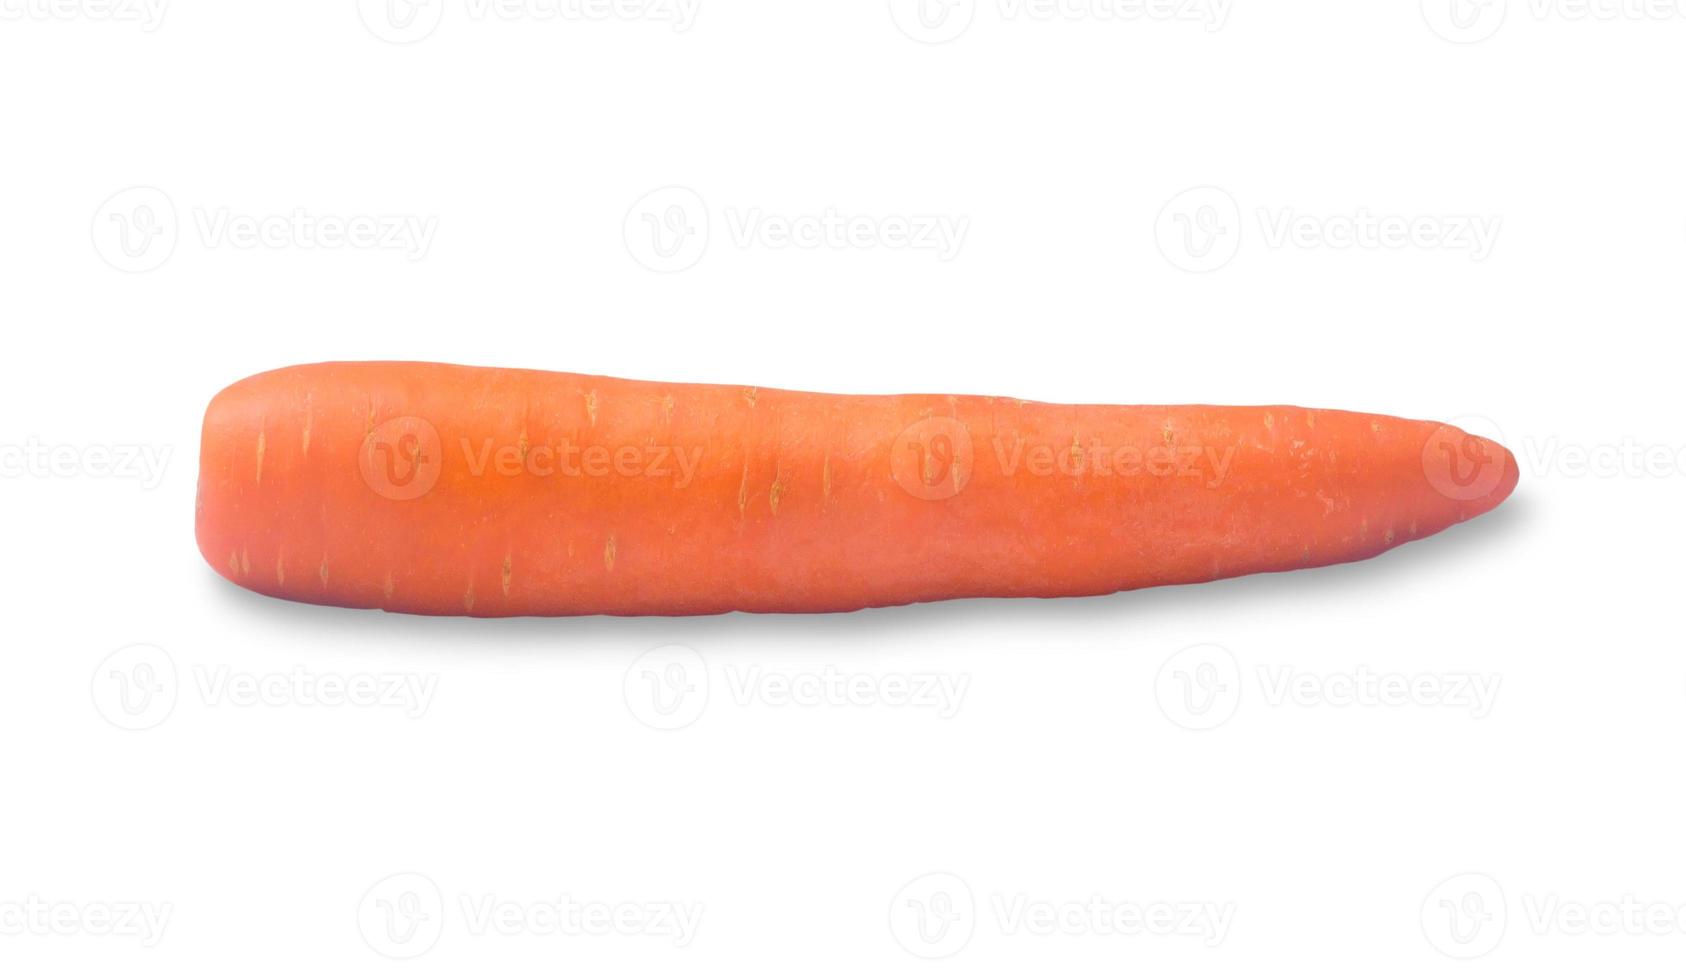 Single fresh orange carrot vegetable isolated on white background with clipping path photo